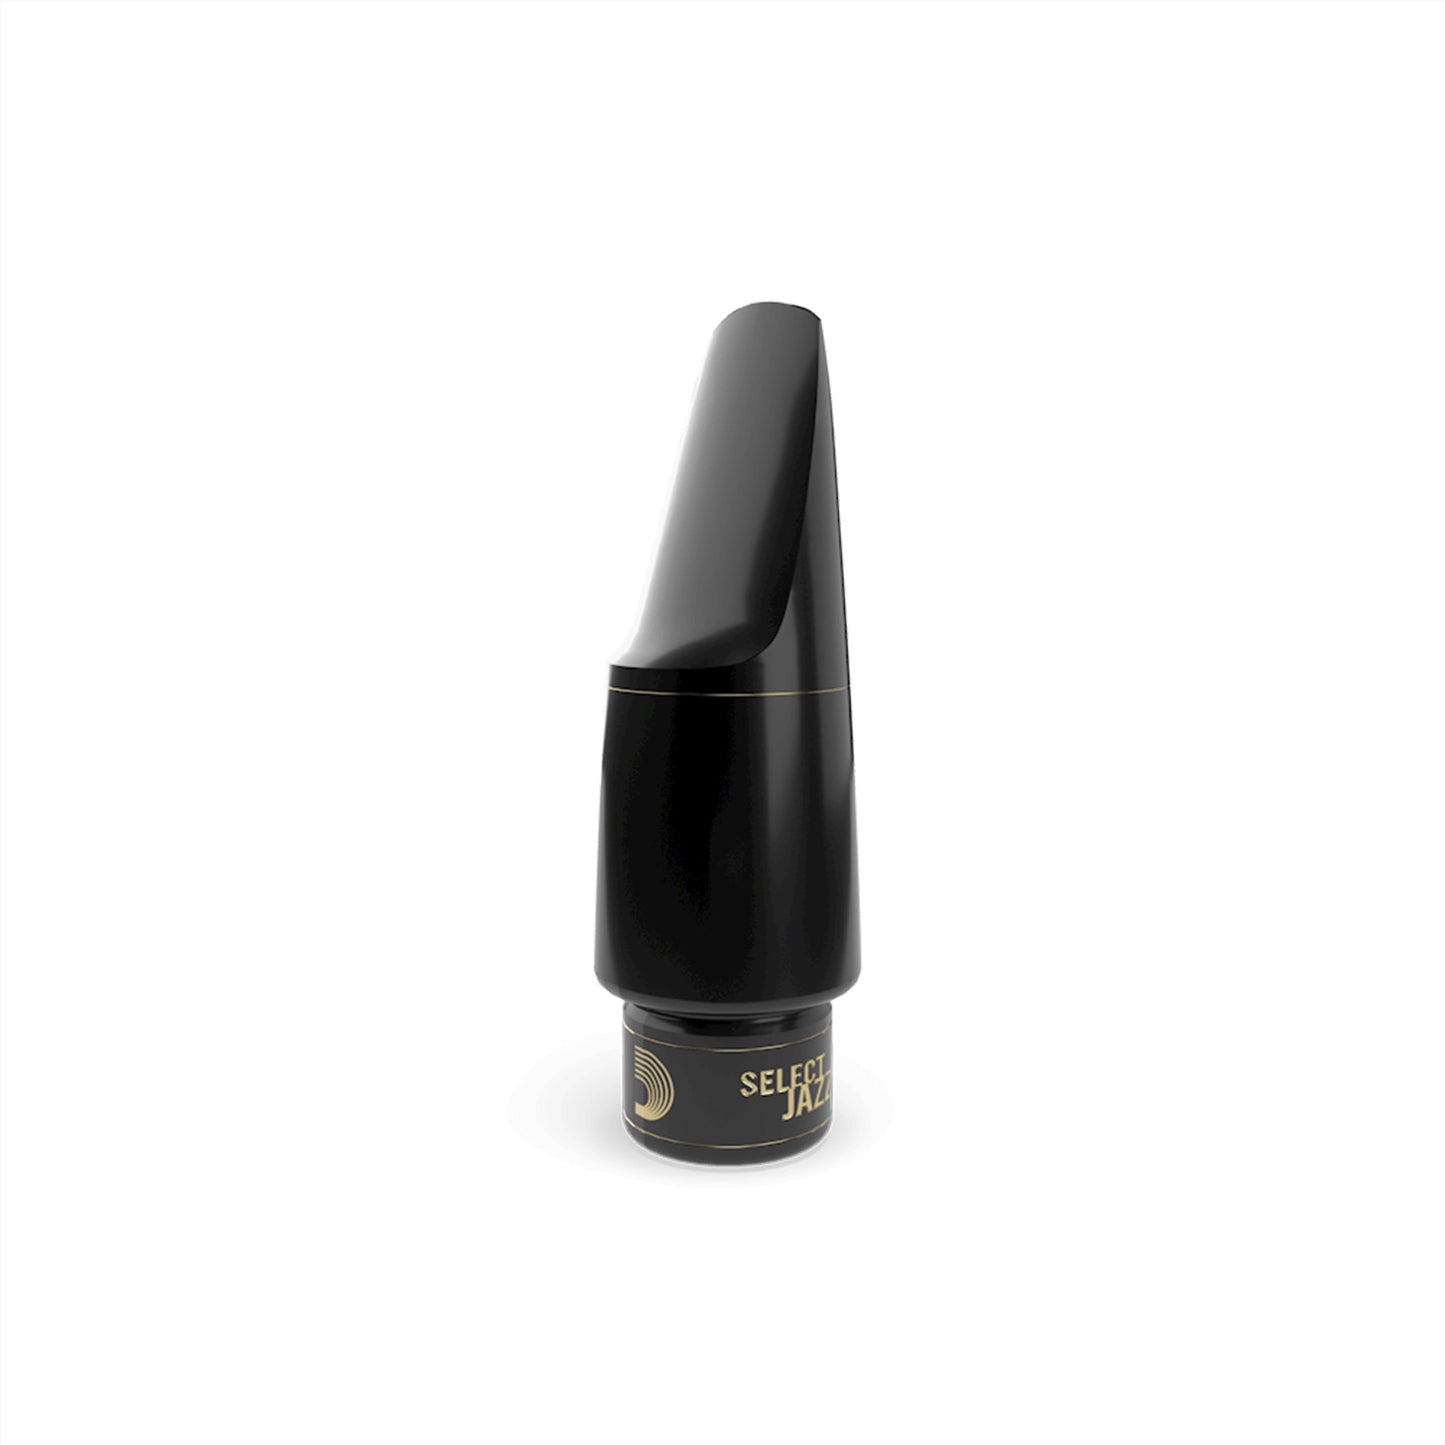 three quarters front view of D'Addario Select Jazz alto saxophone mouthpiece